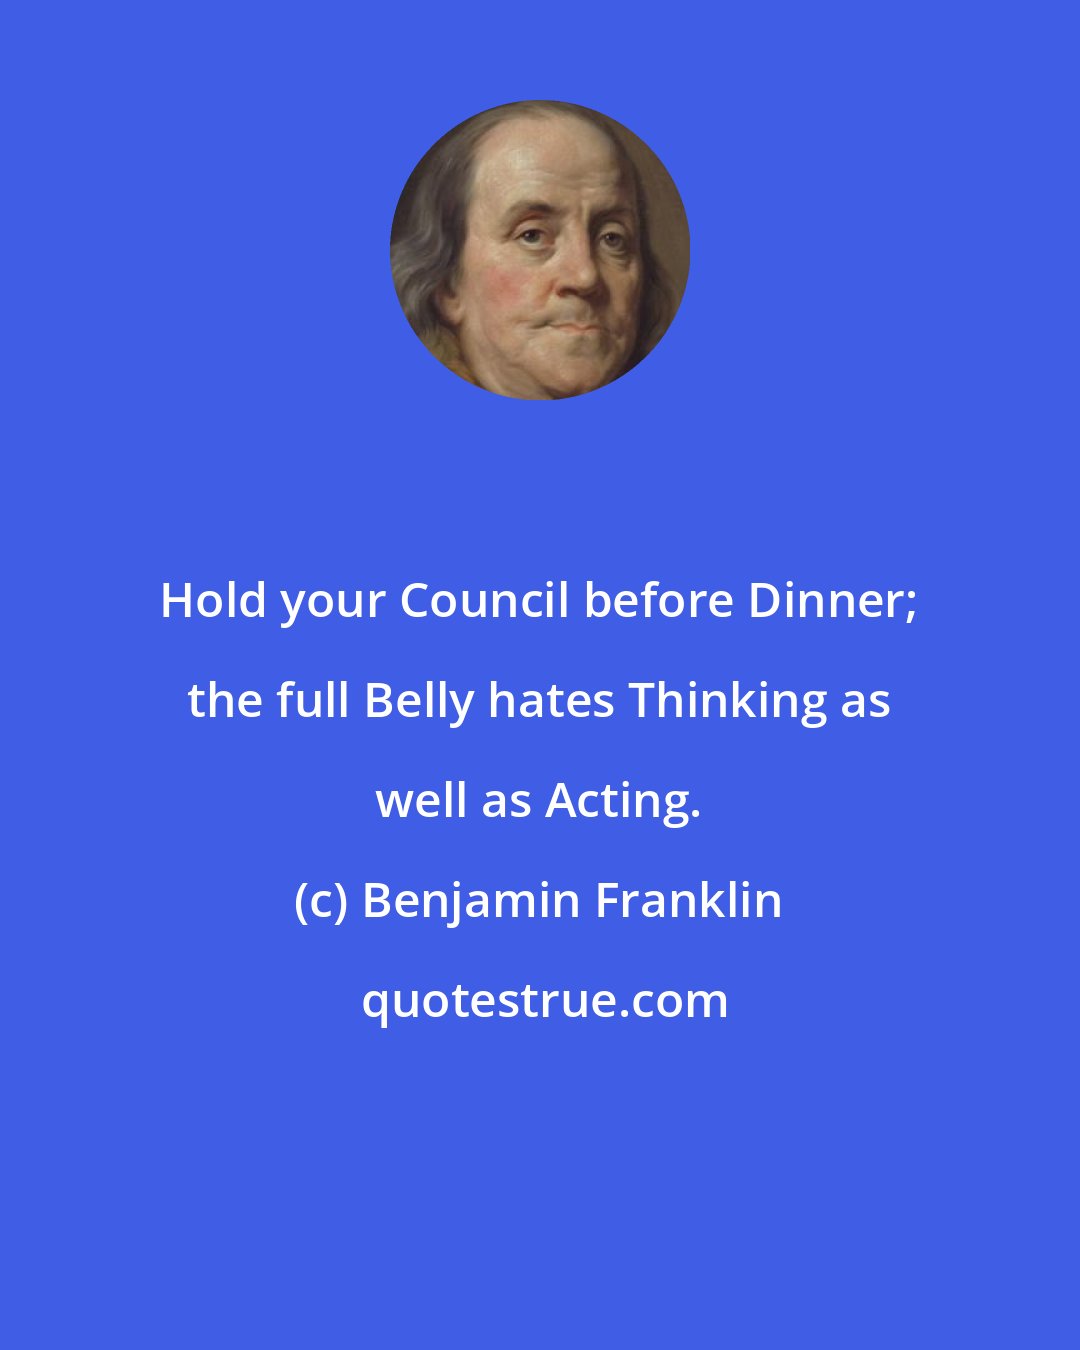 Benjamin Franklin: Hold your Council before Dinner; the full Belly hates Thinking as well as Acting.